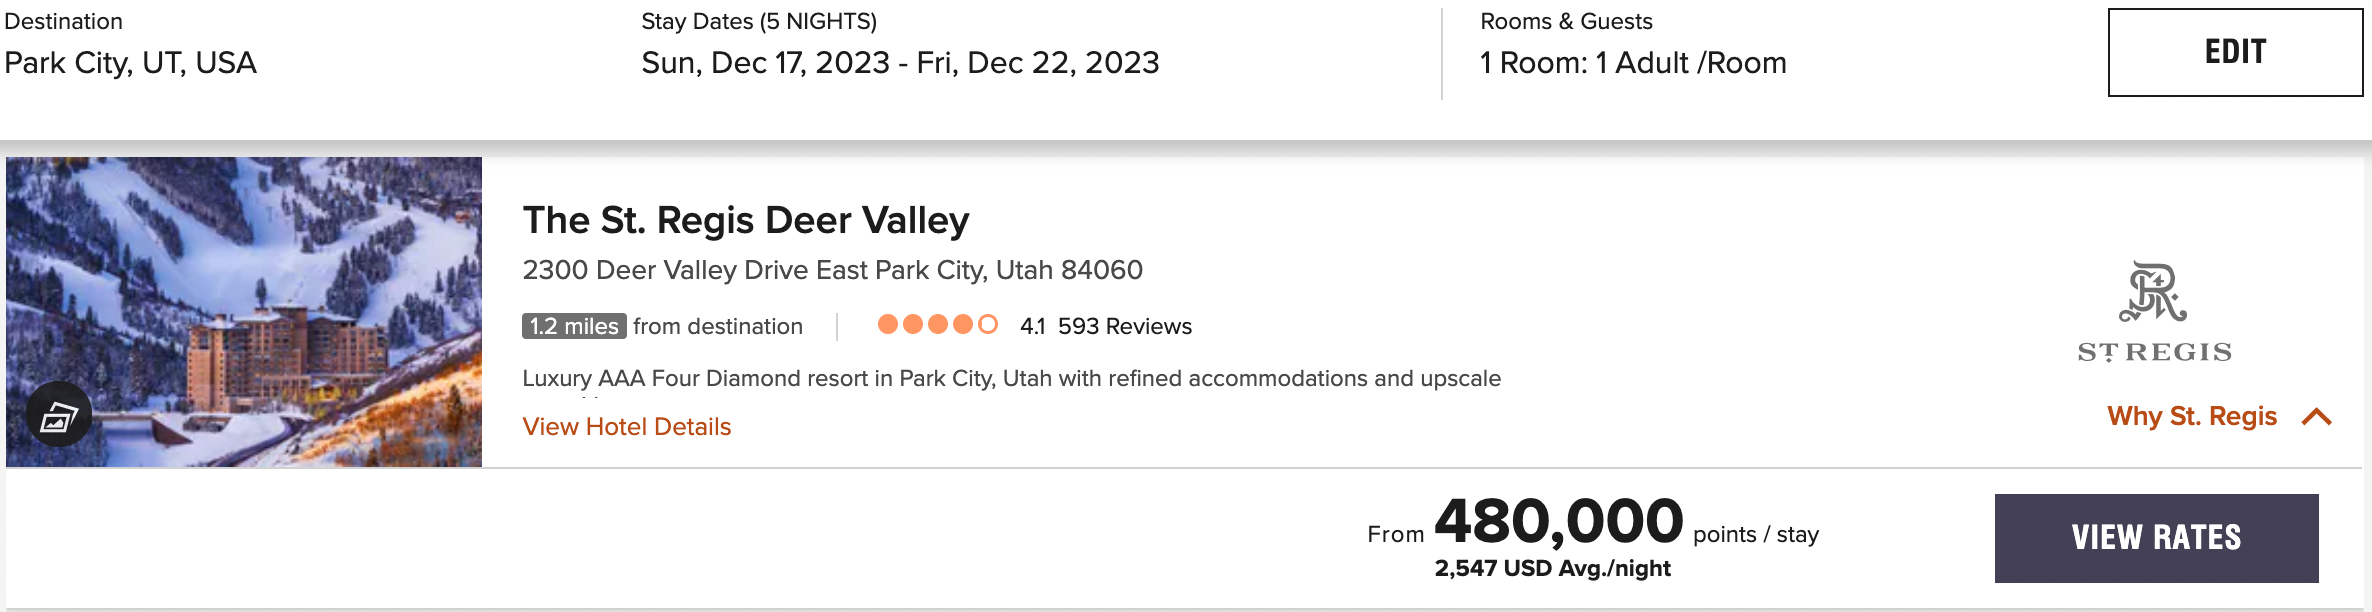 Booking a stay at the St. Regis Deer Valley